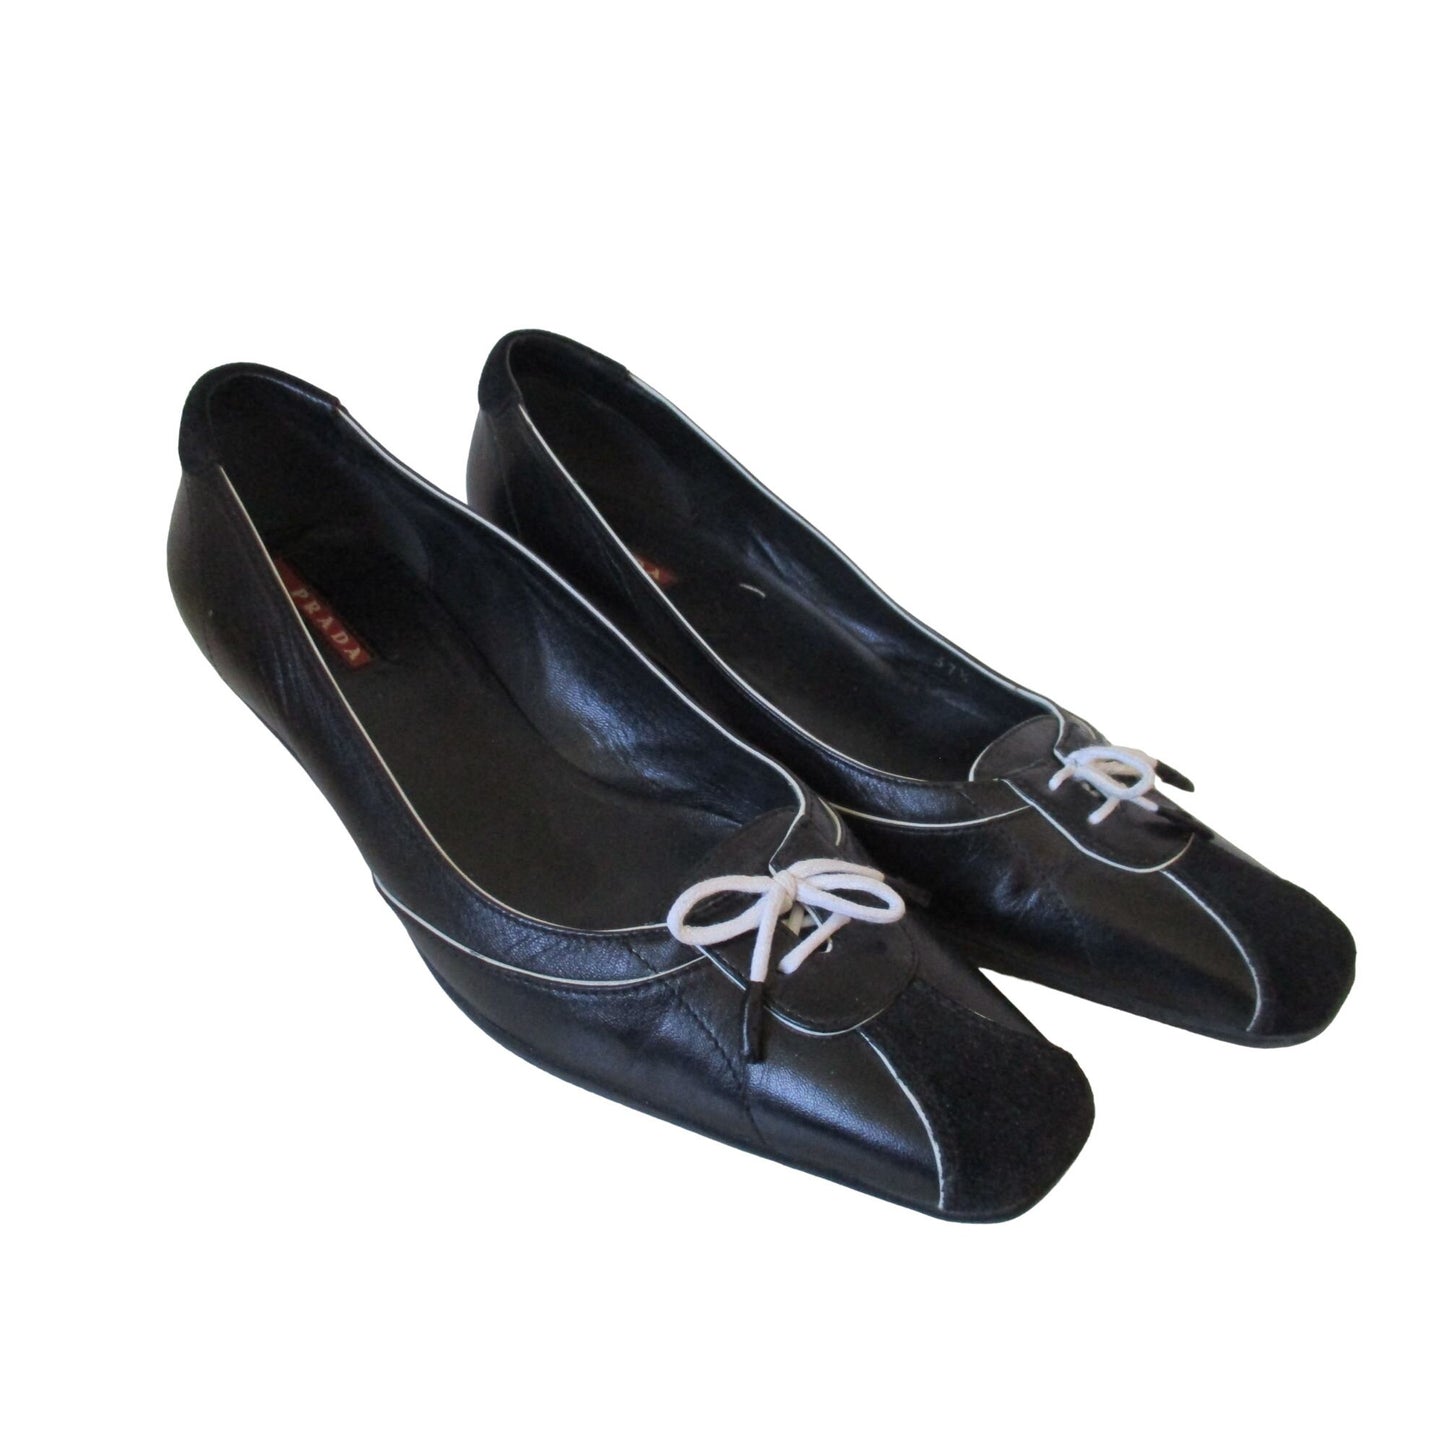 Prada Sport black leather 37.5 kitten heels with suede accents and white bows and white tonal stitching